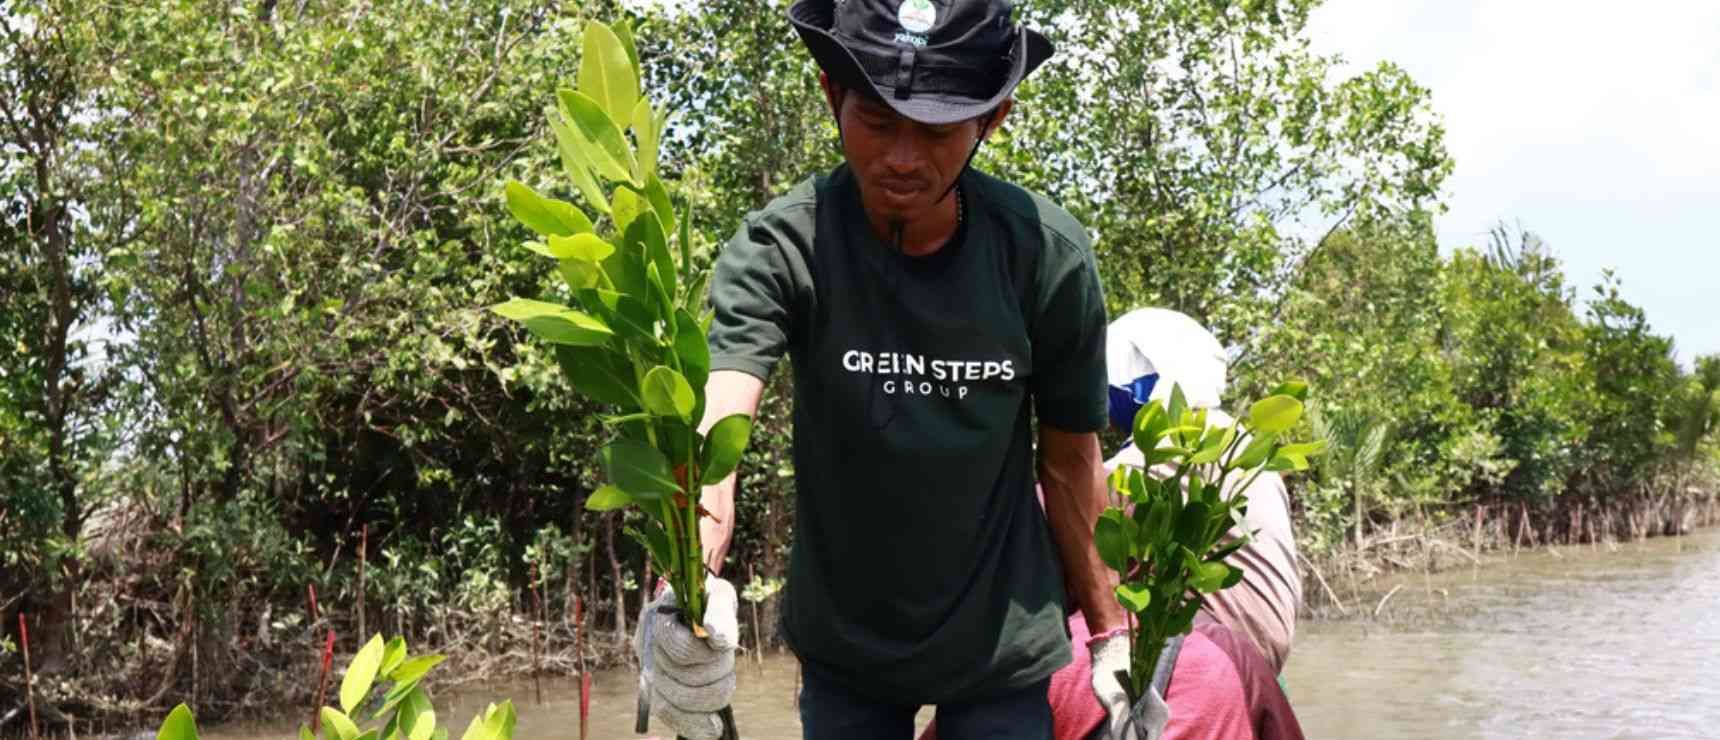 This initiative involves the local community in tree planting activities, creating job opportunities. Photo Credit: Green Steps. This initiative involves the local community in tree planting activities, creating job opportunities. Photo Credit: Green Steps The Grange Invests in Our Planet: A Pledge to Plant a Tree for Every Student